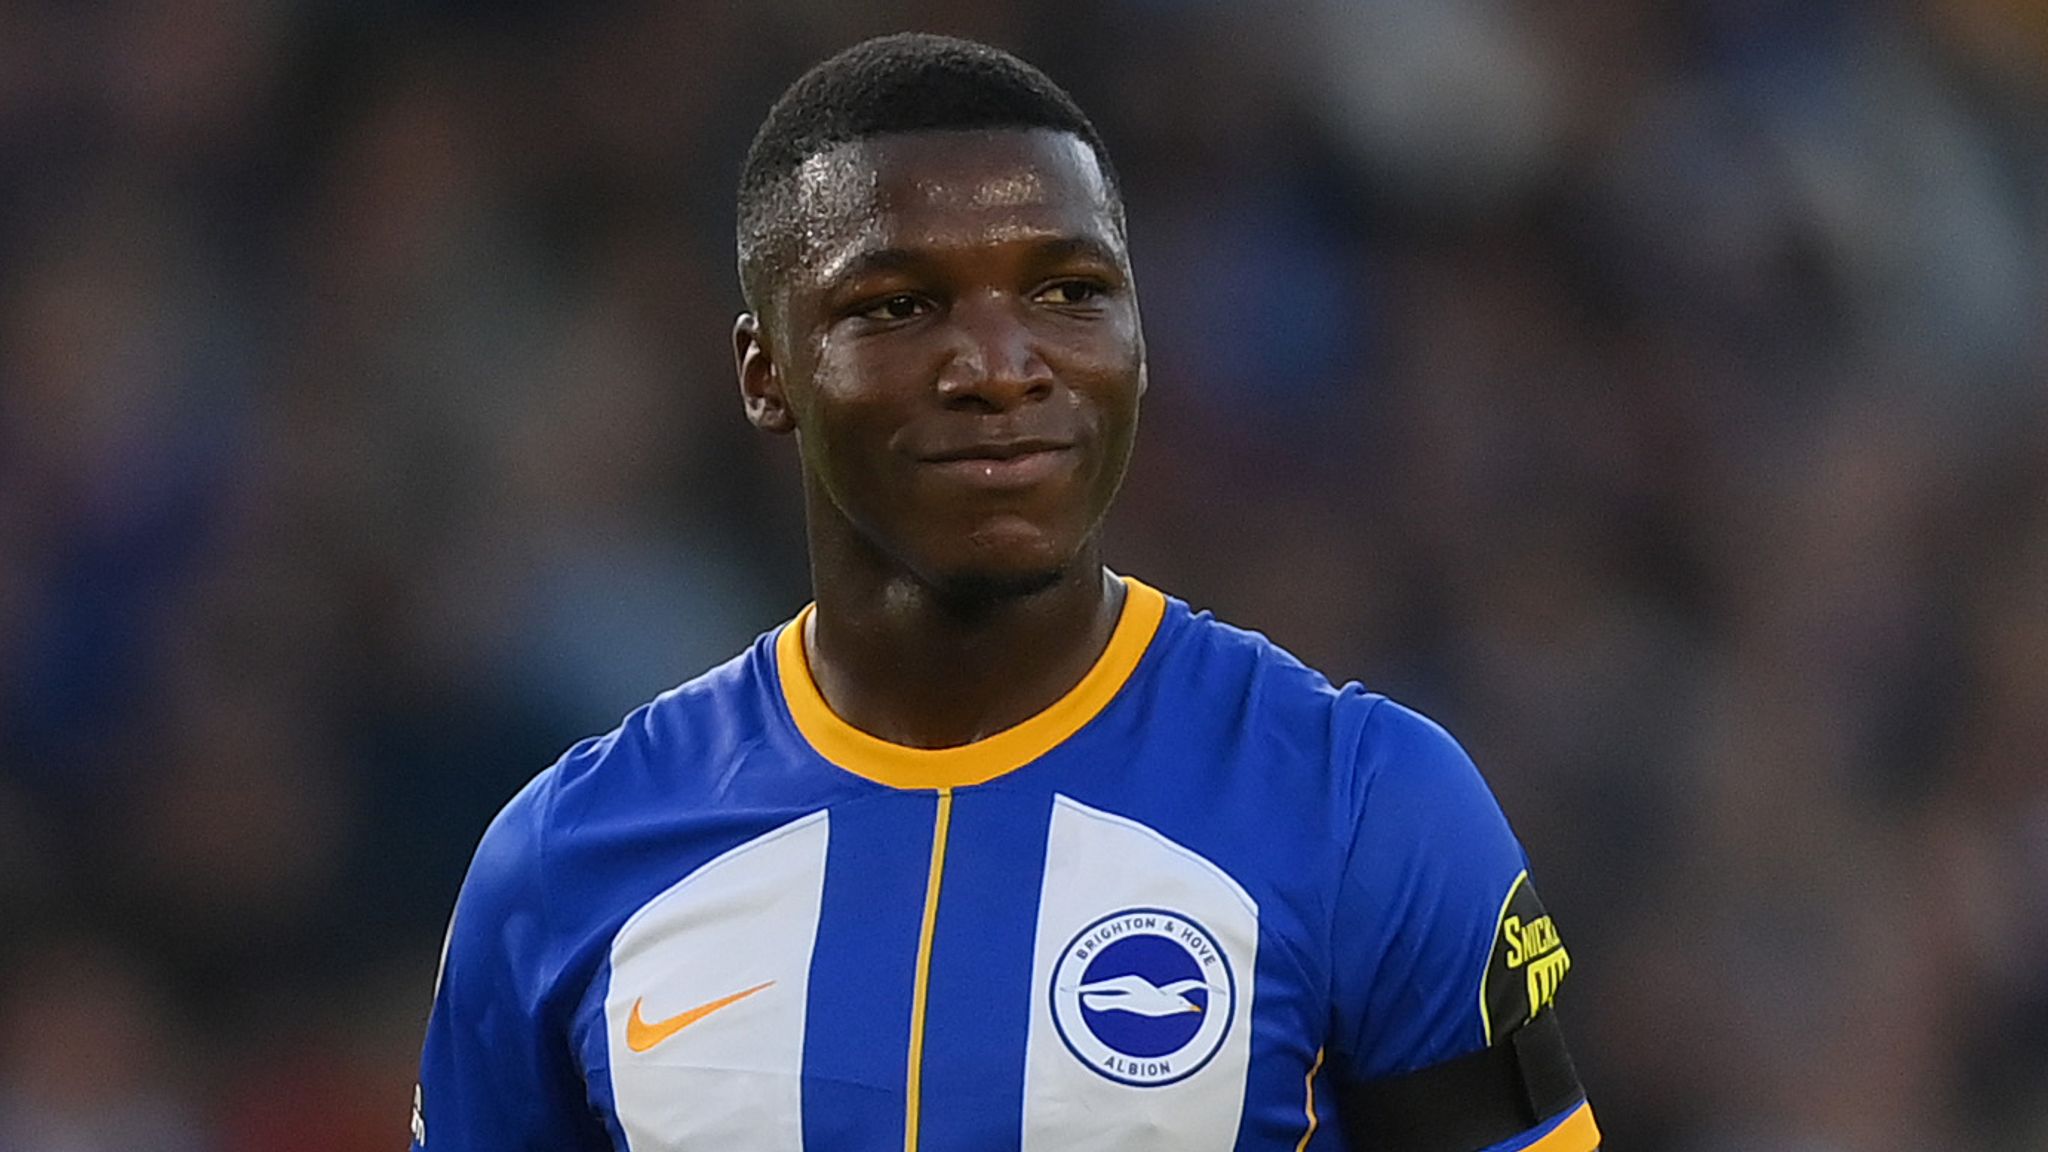 Liverpool agree terms with Brighton for star midfielder Moises Caicedo. 